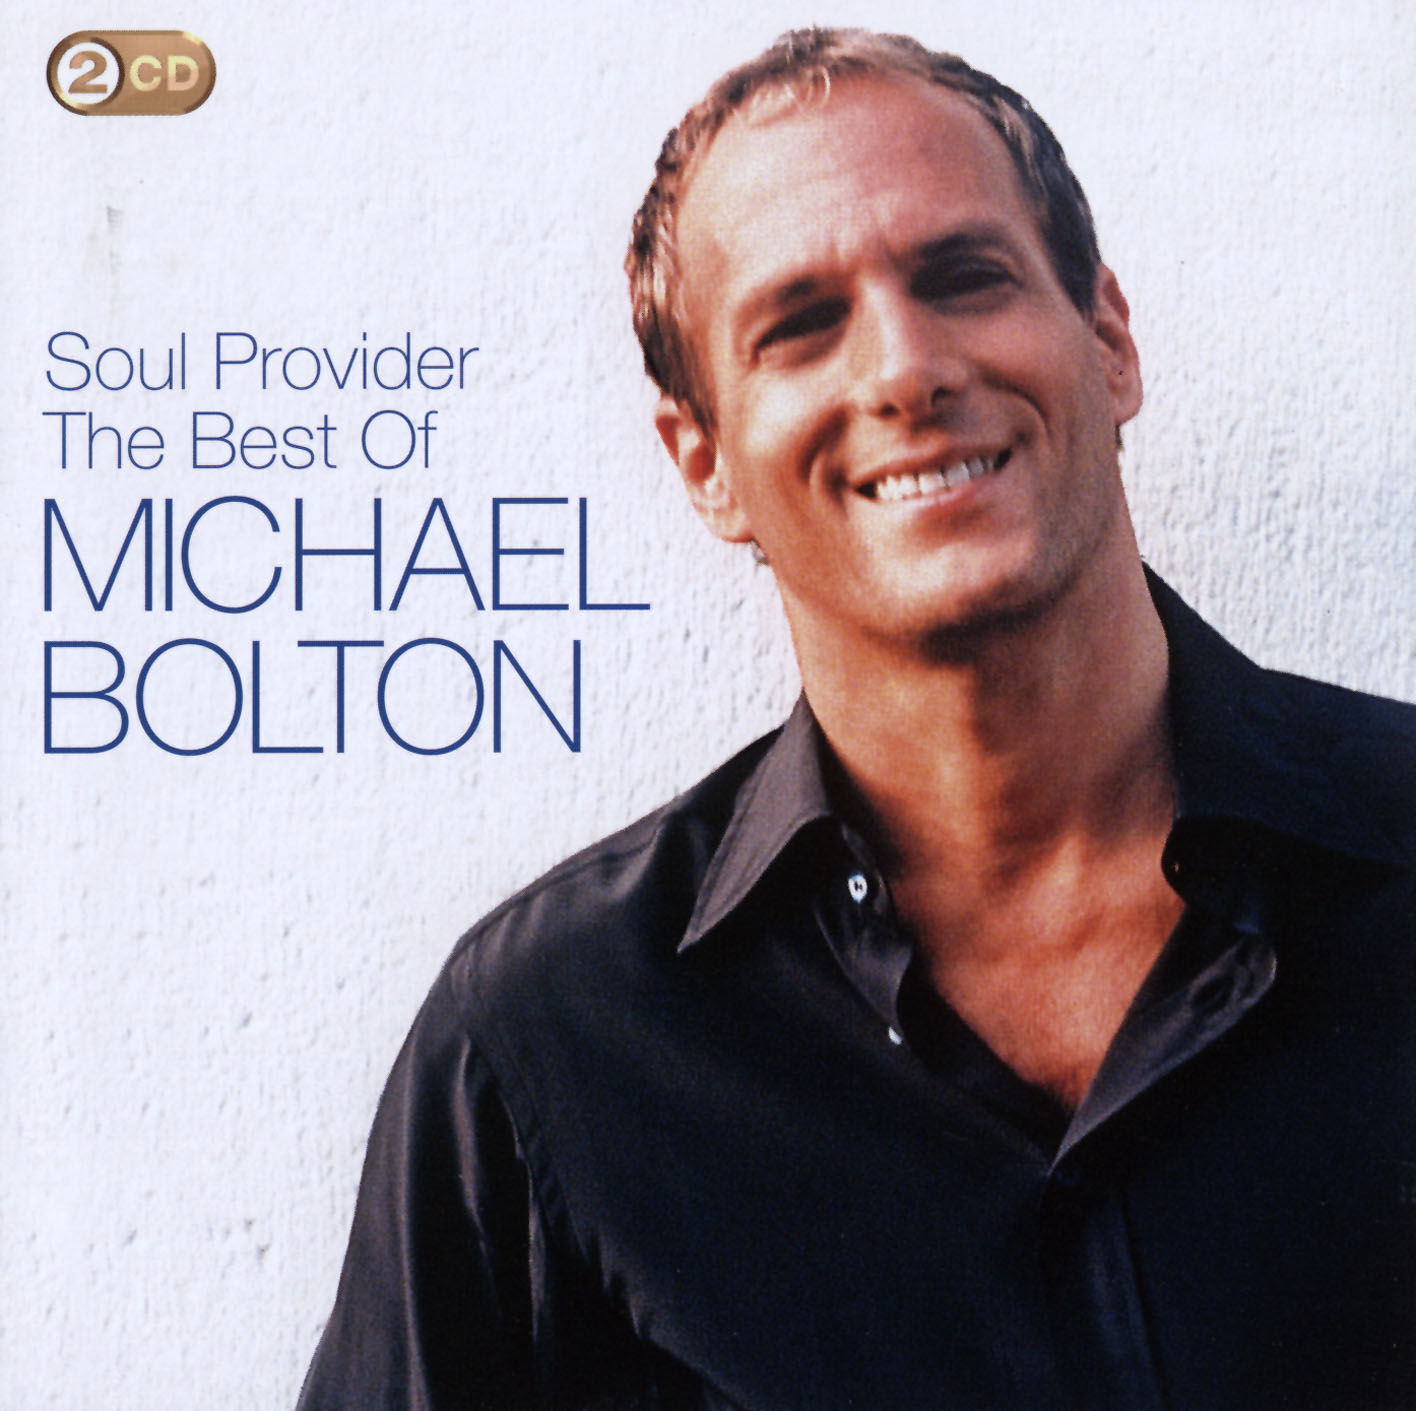 The Soul Provider: The Best Of Michael Bolton